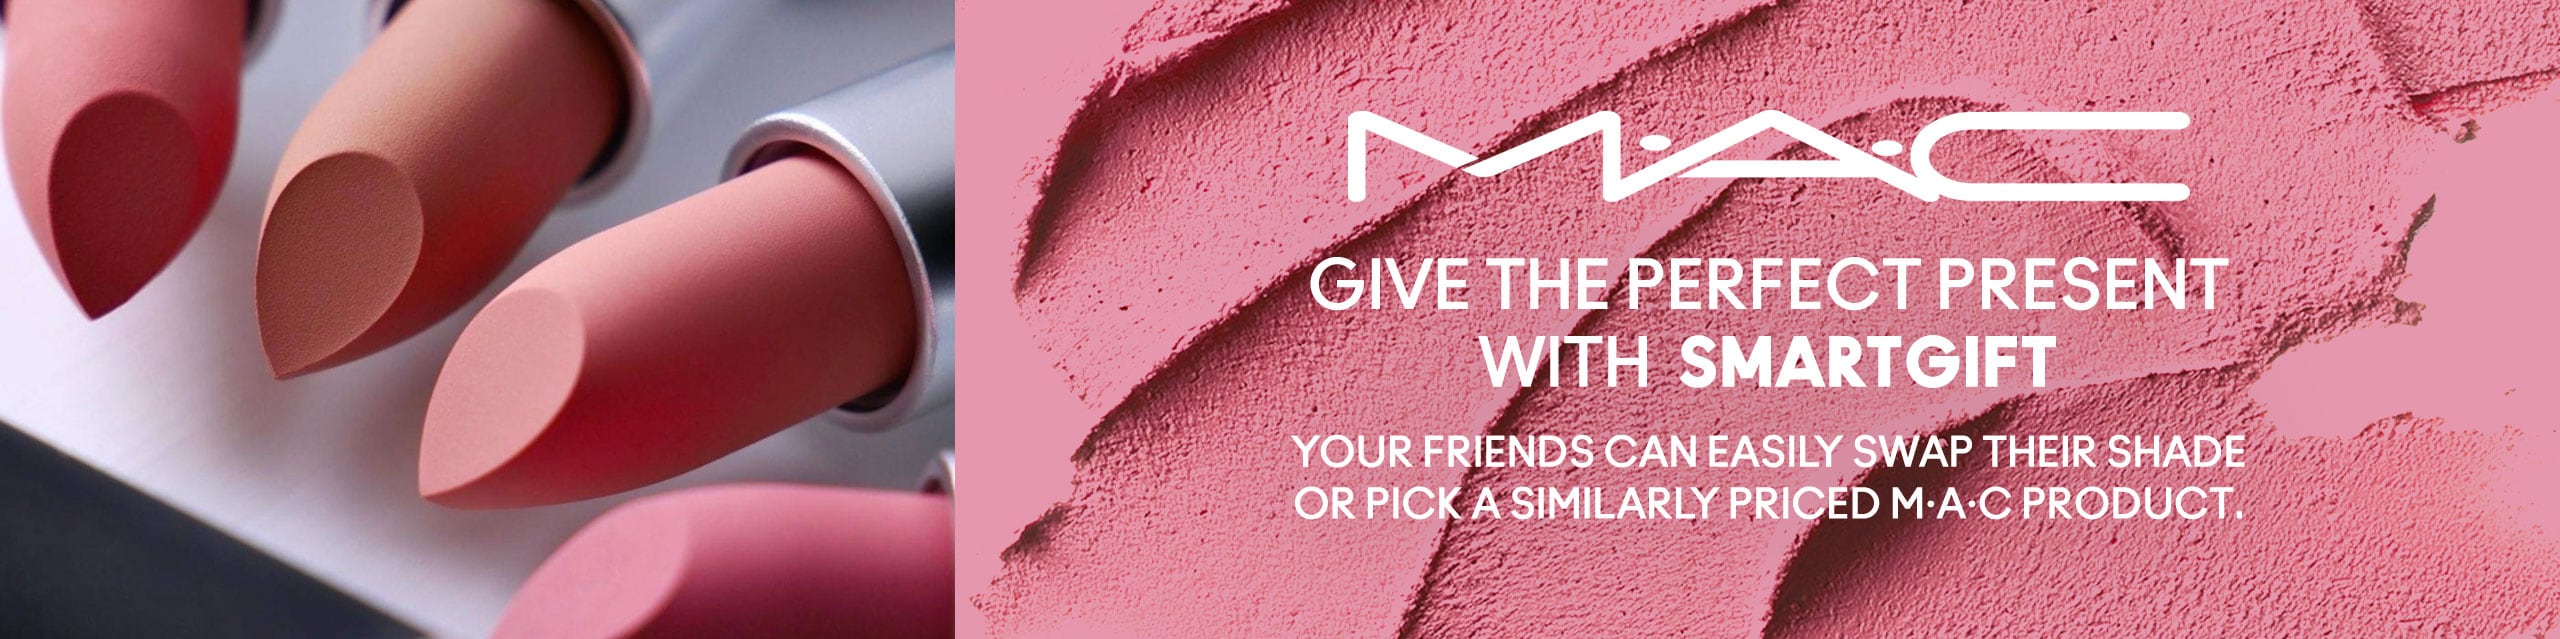 Give the perfect present with SmartGift. Your friend can easily swap their shade or pick a similarly priced M·A·C product.